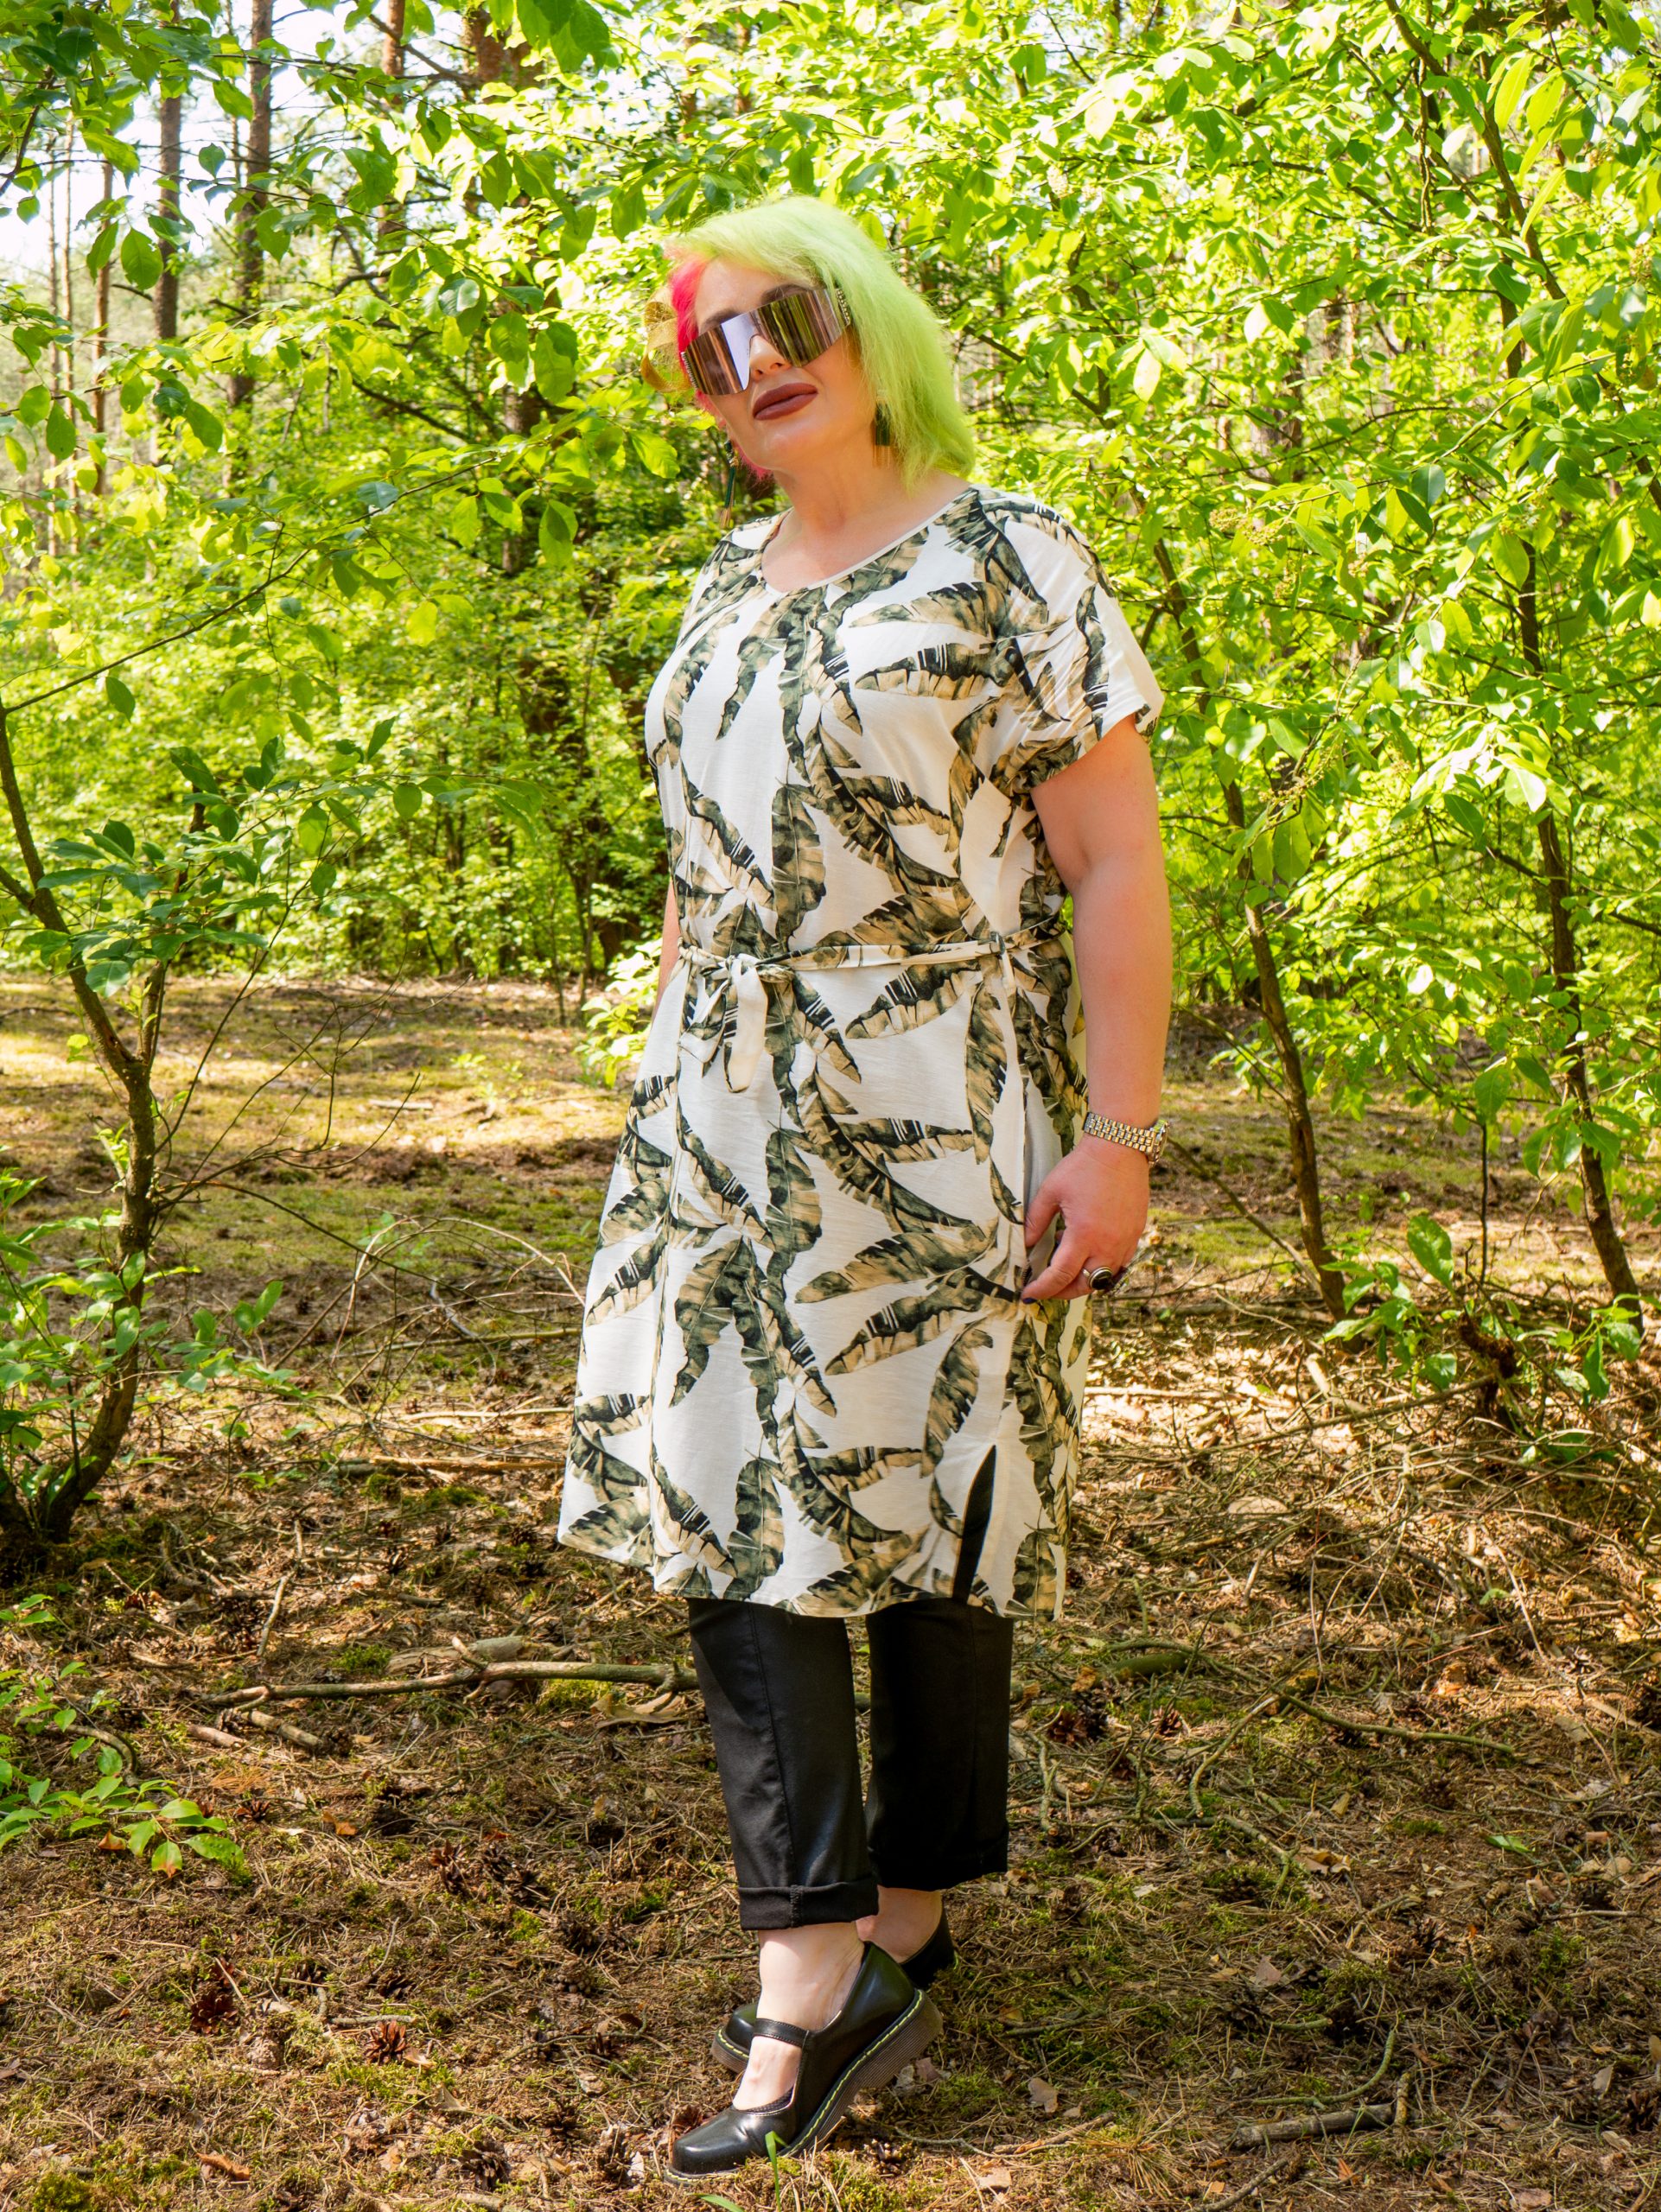 Perfect tunic for a walk in the forest